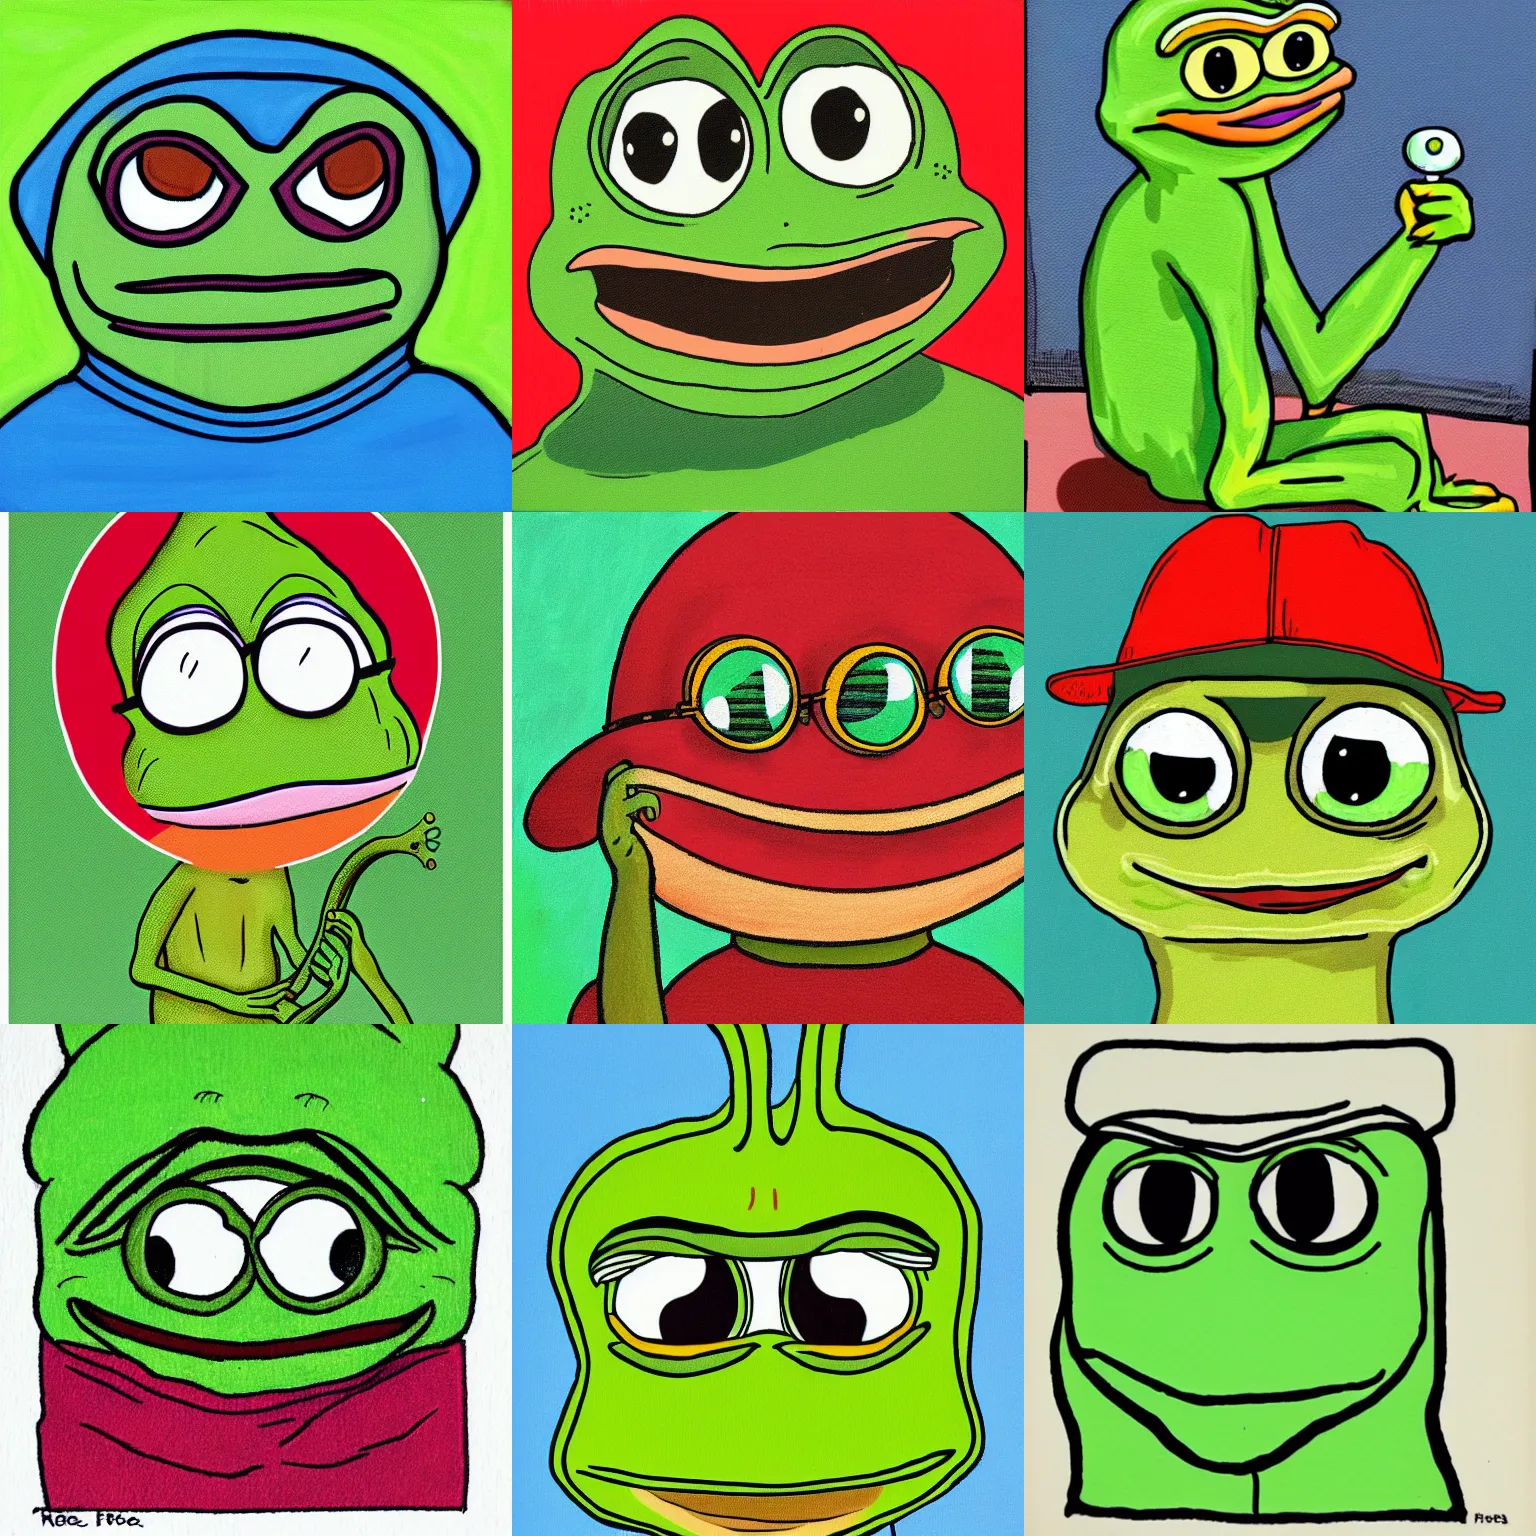 pepe the frog, by Jasper Johns and Matt Furie, | Stable Diffusion | OpenArt